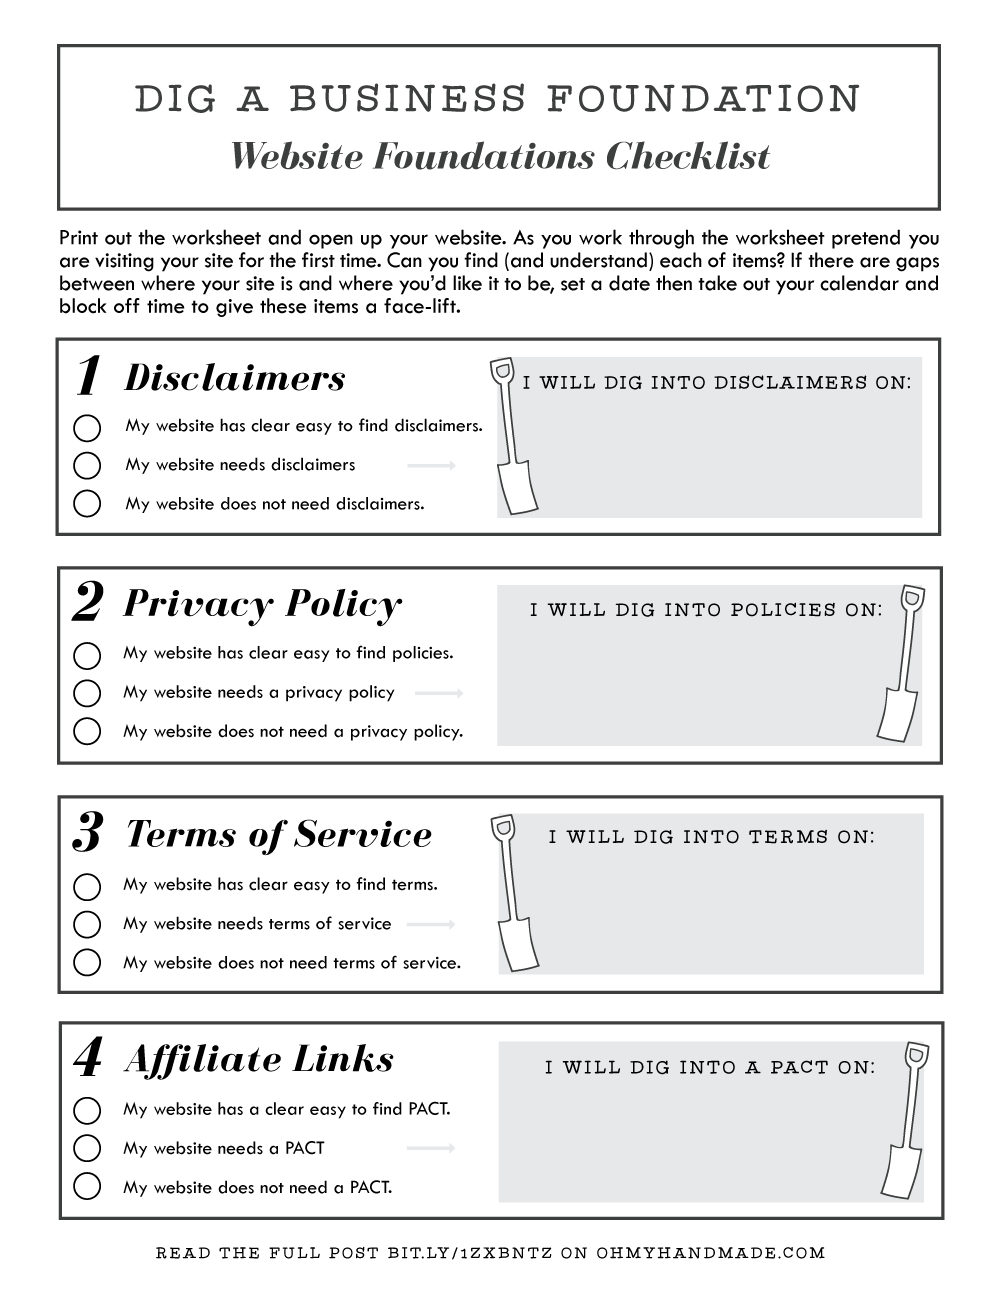 {Part 1} Dig a Business Foundation: Your Website (disclaimers, privacy policies, terms & conditions, affiliate links) on Oh My! Handmade